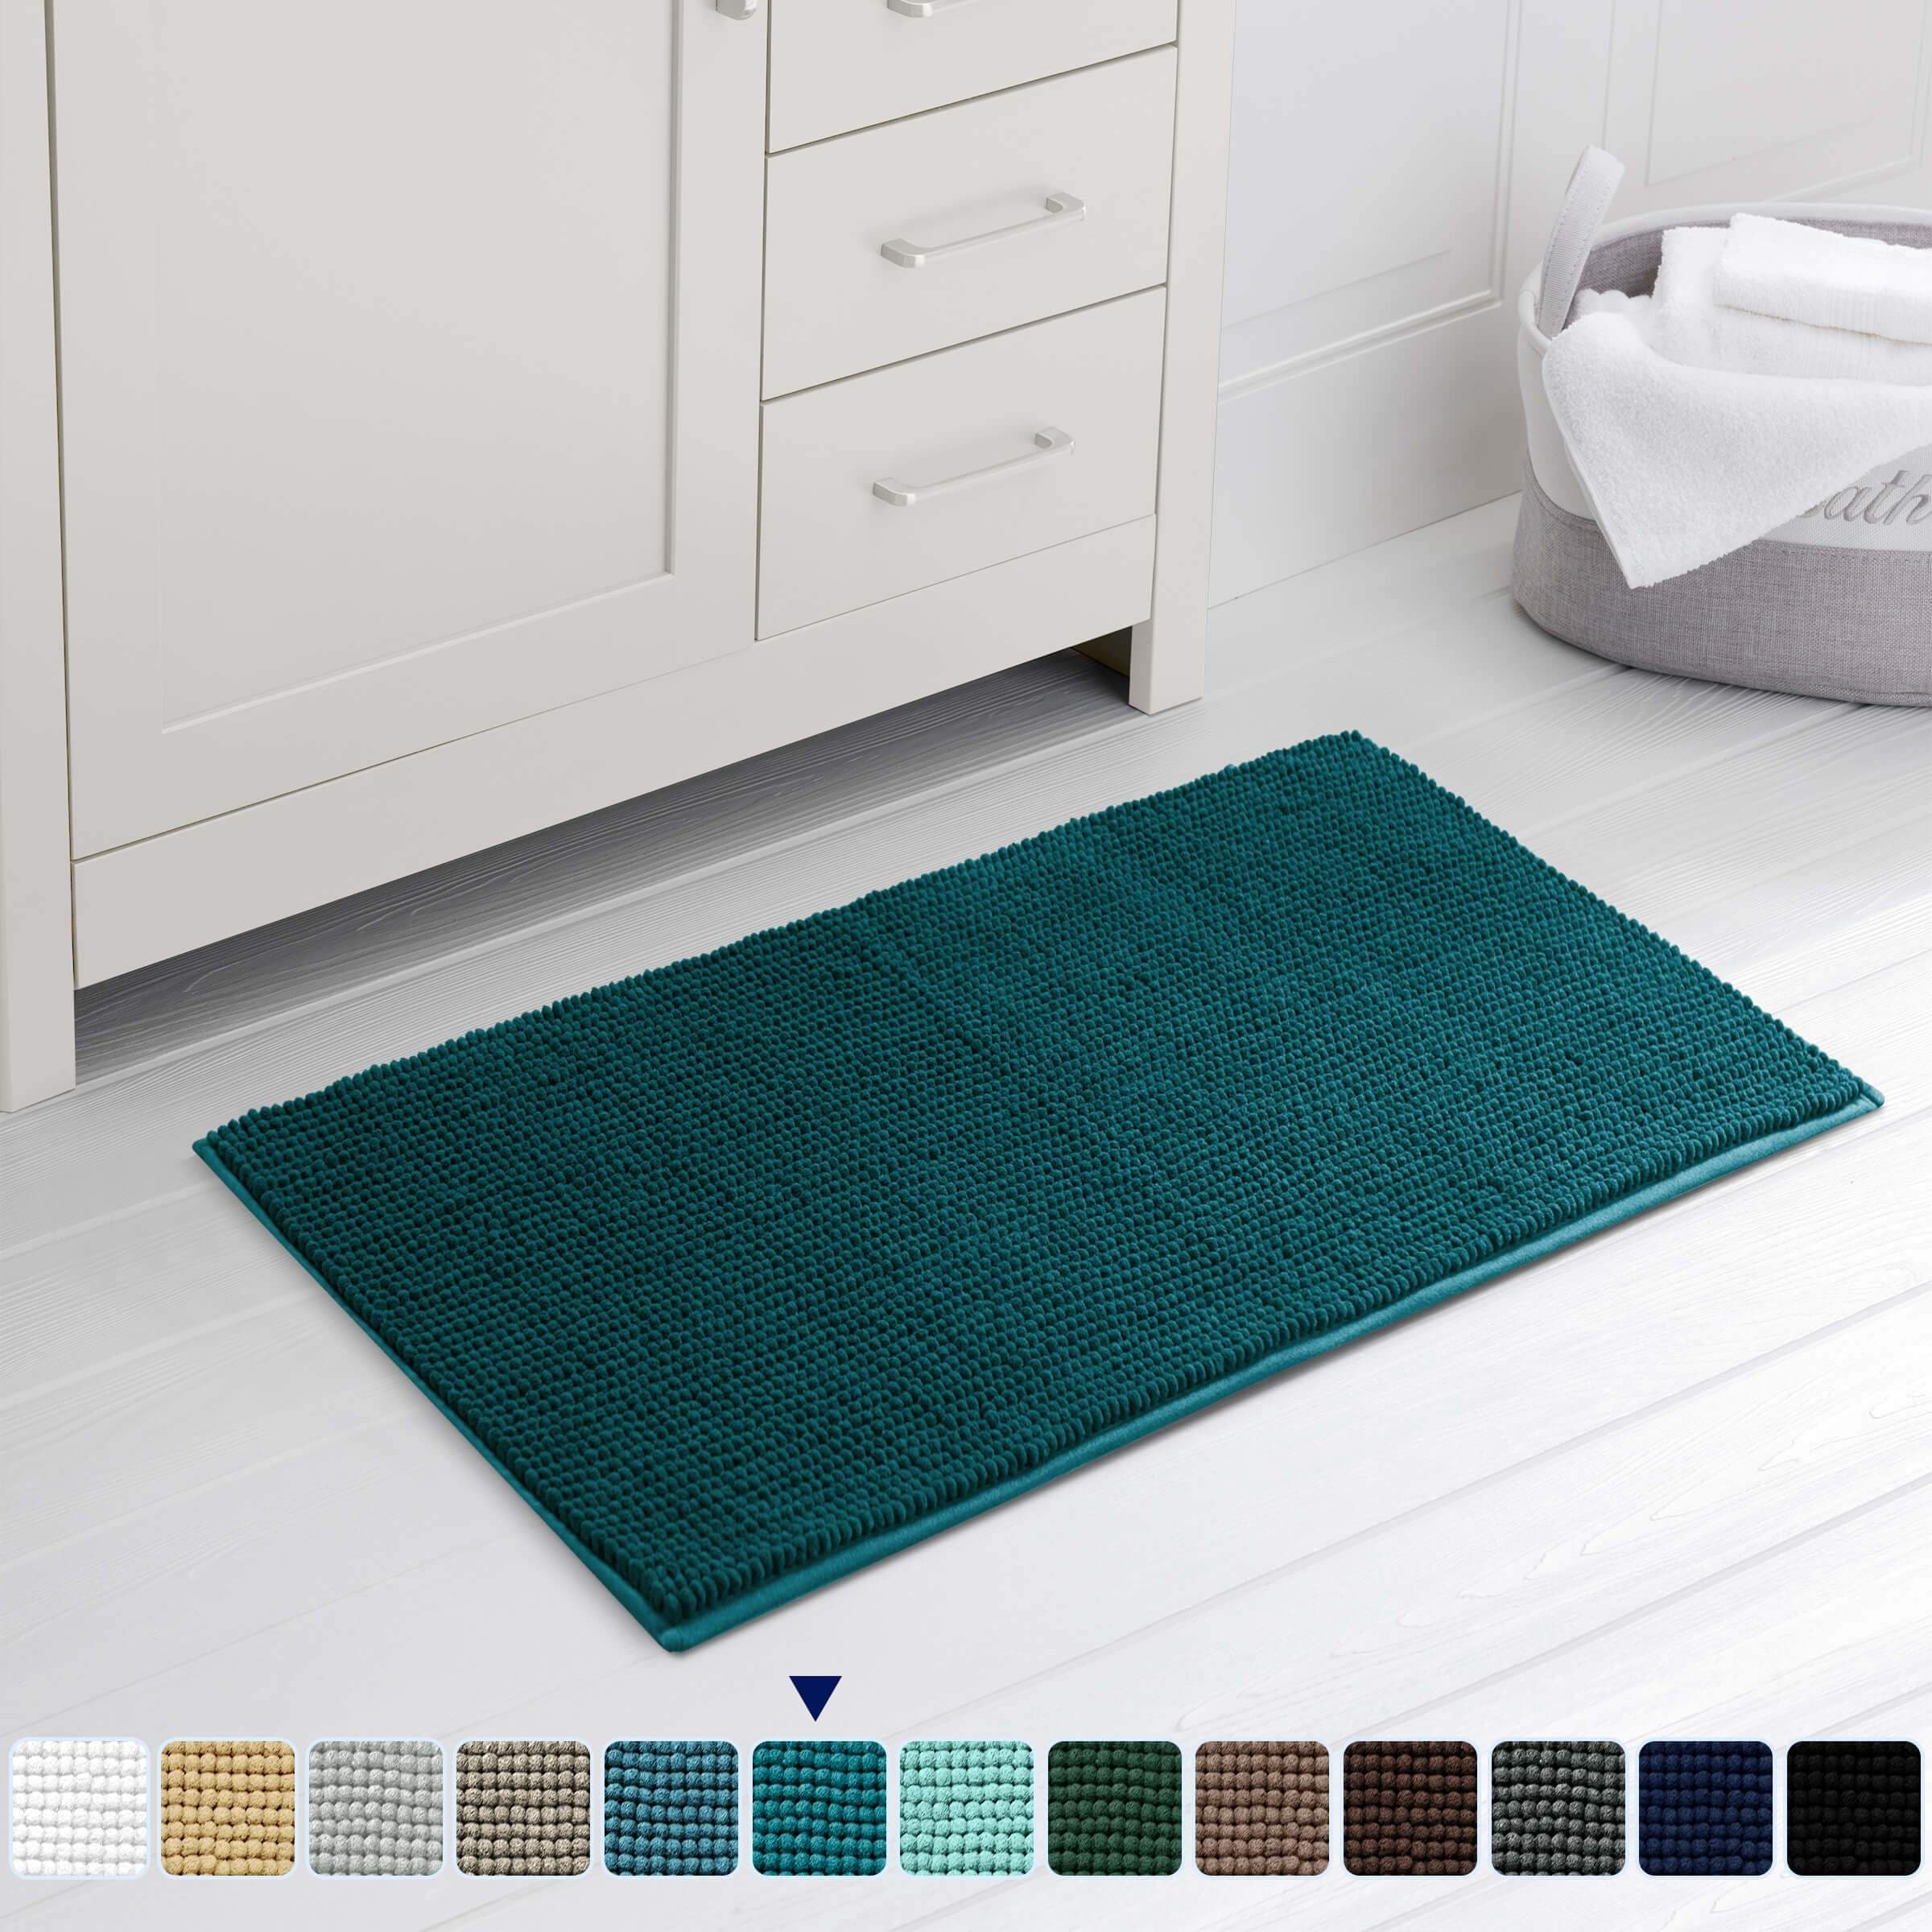 https://ak1.ostkcdn.com/images/products/is/images/direct/013d47504b96152a848c1208bfb8c54a6fdbadf3/Subrtex-Chenille-Bathroom-Rugs-Soft-Super-Water-Absorbing-Shower-Mats.jpg